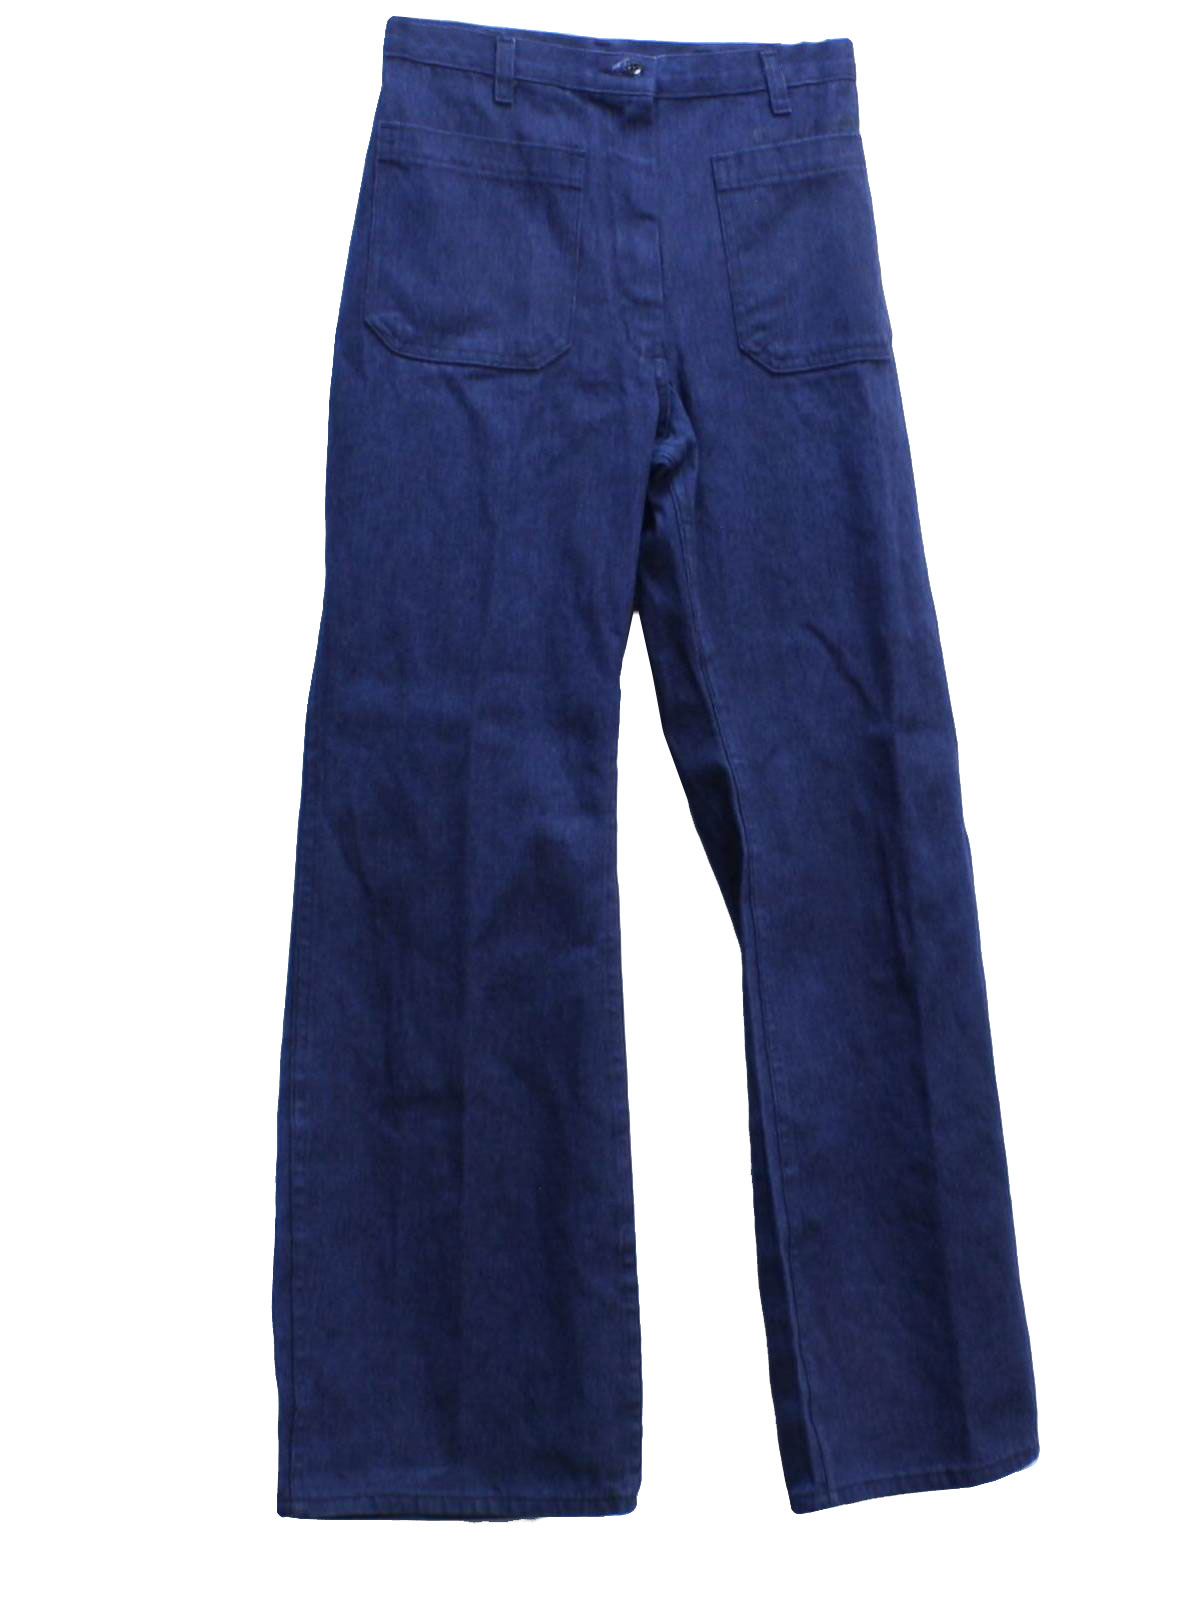 70s Retro Bellbottom Pants: 70s -Southern Apparel Company- Womens faded ...